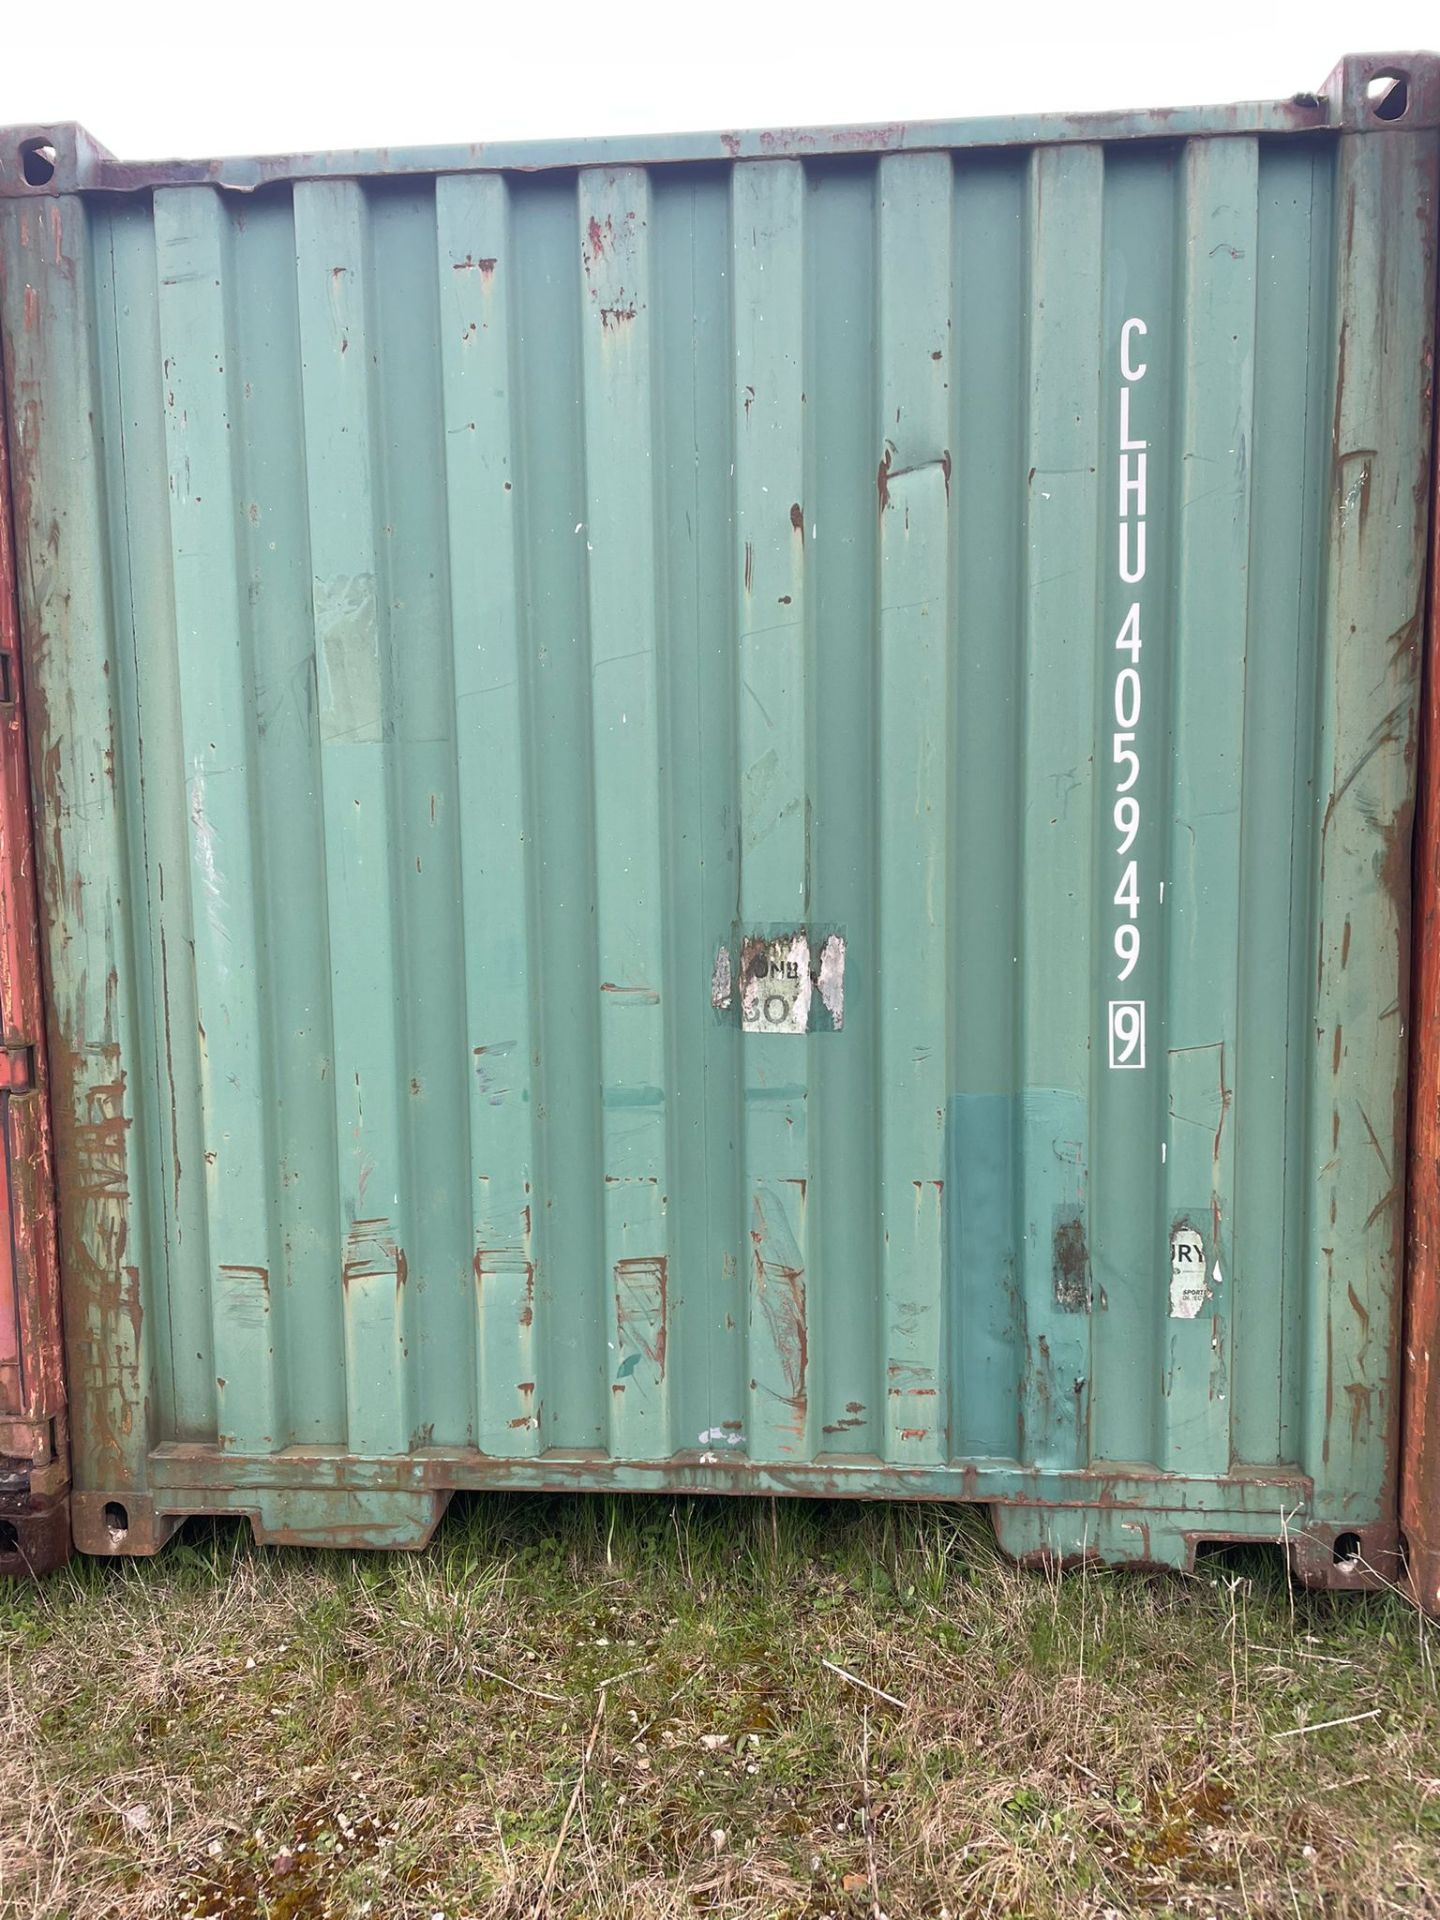 Shipping Container - ref CLHU4059499 - NO RESERVE (40’ GP - Standard) - Image 4 of 4